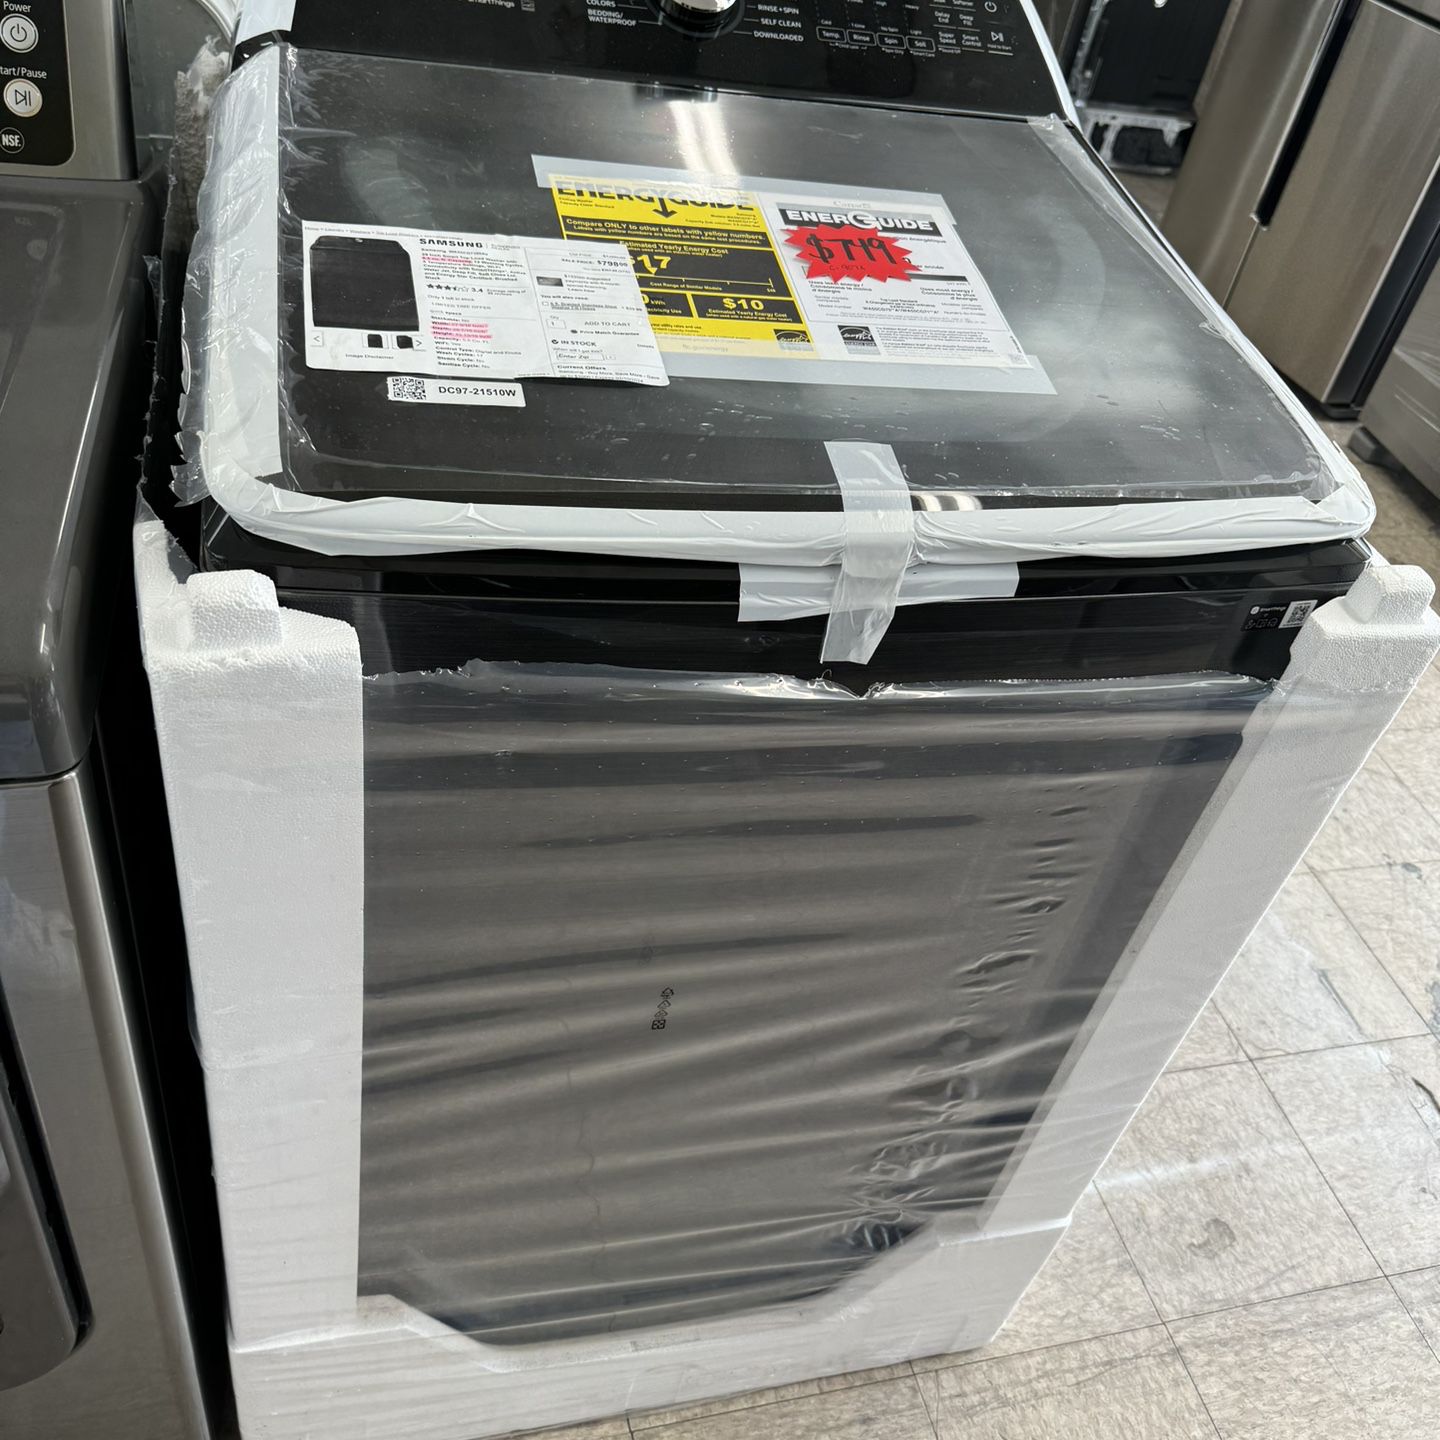 5.0 Top Load Washer Samsung All Black Brand New